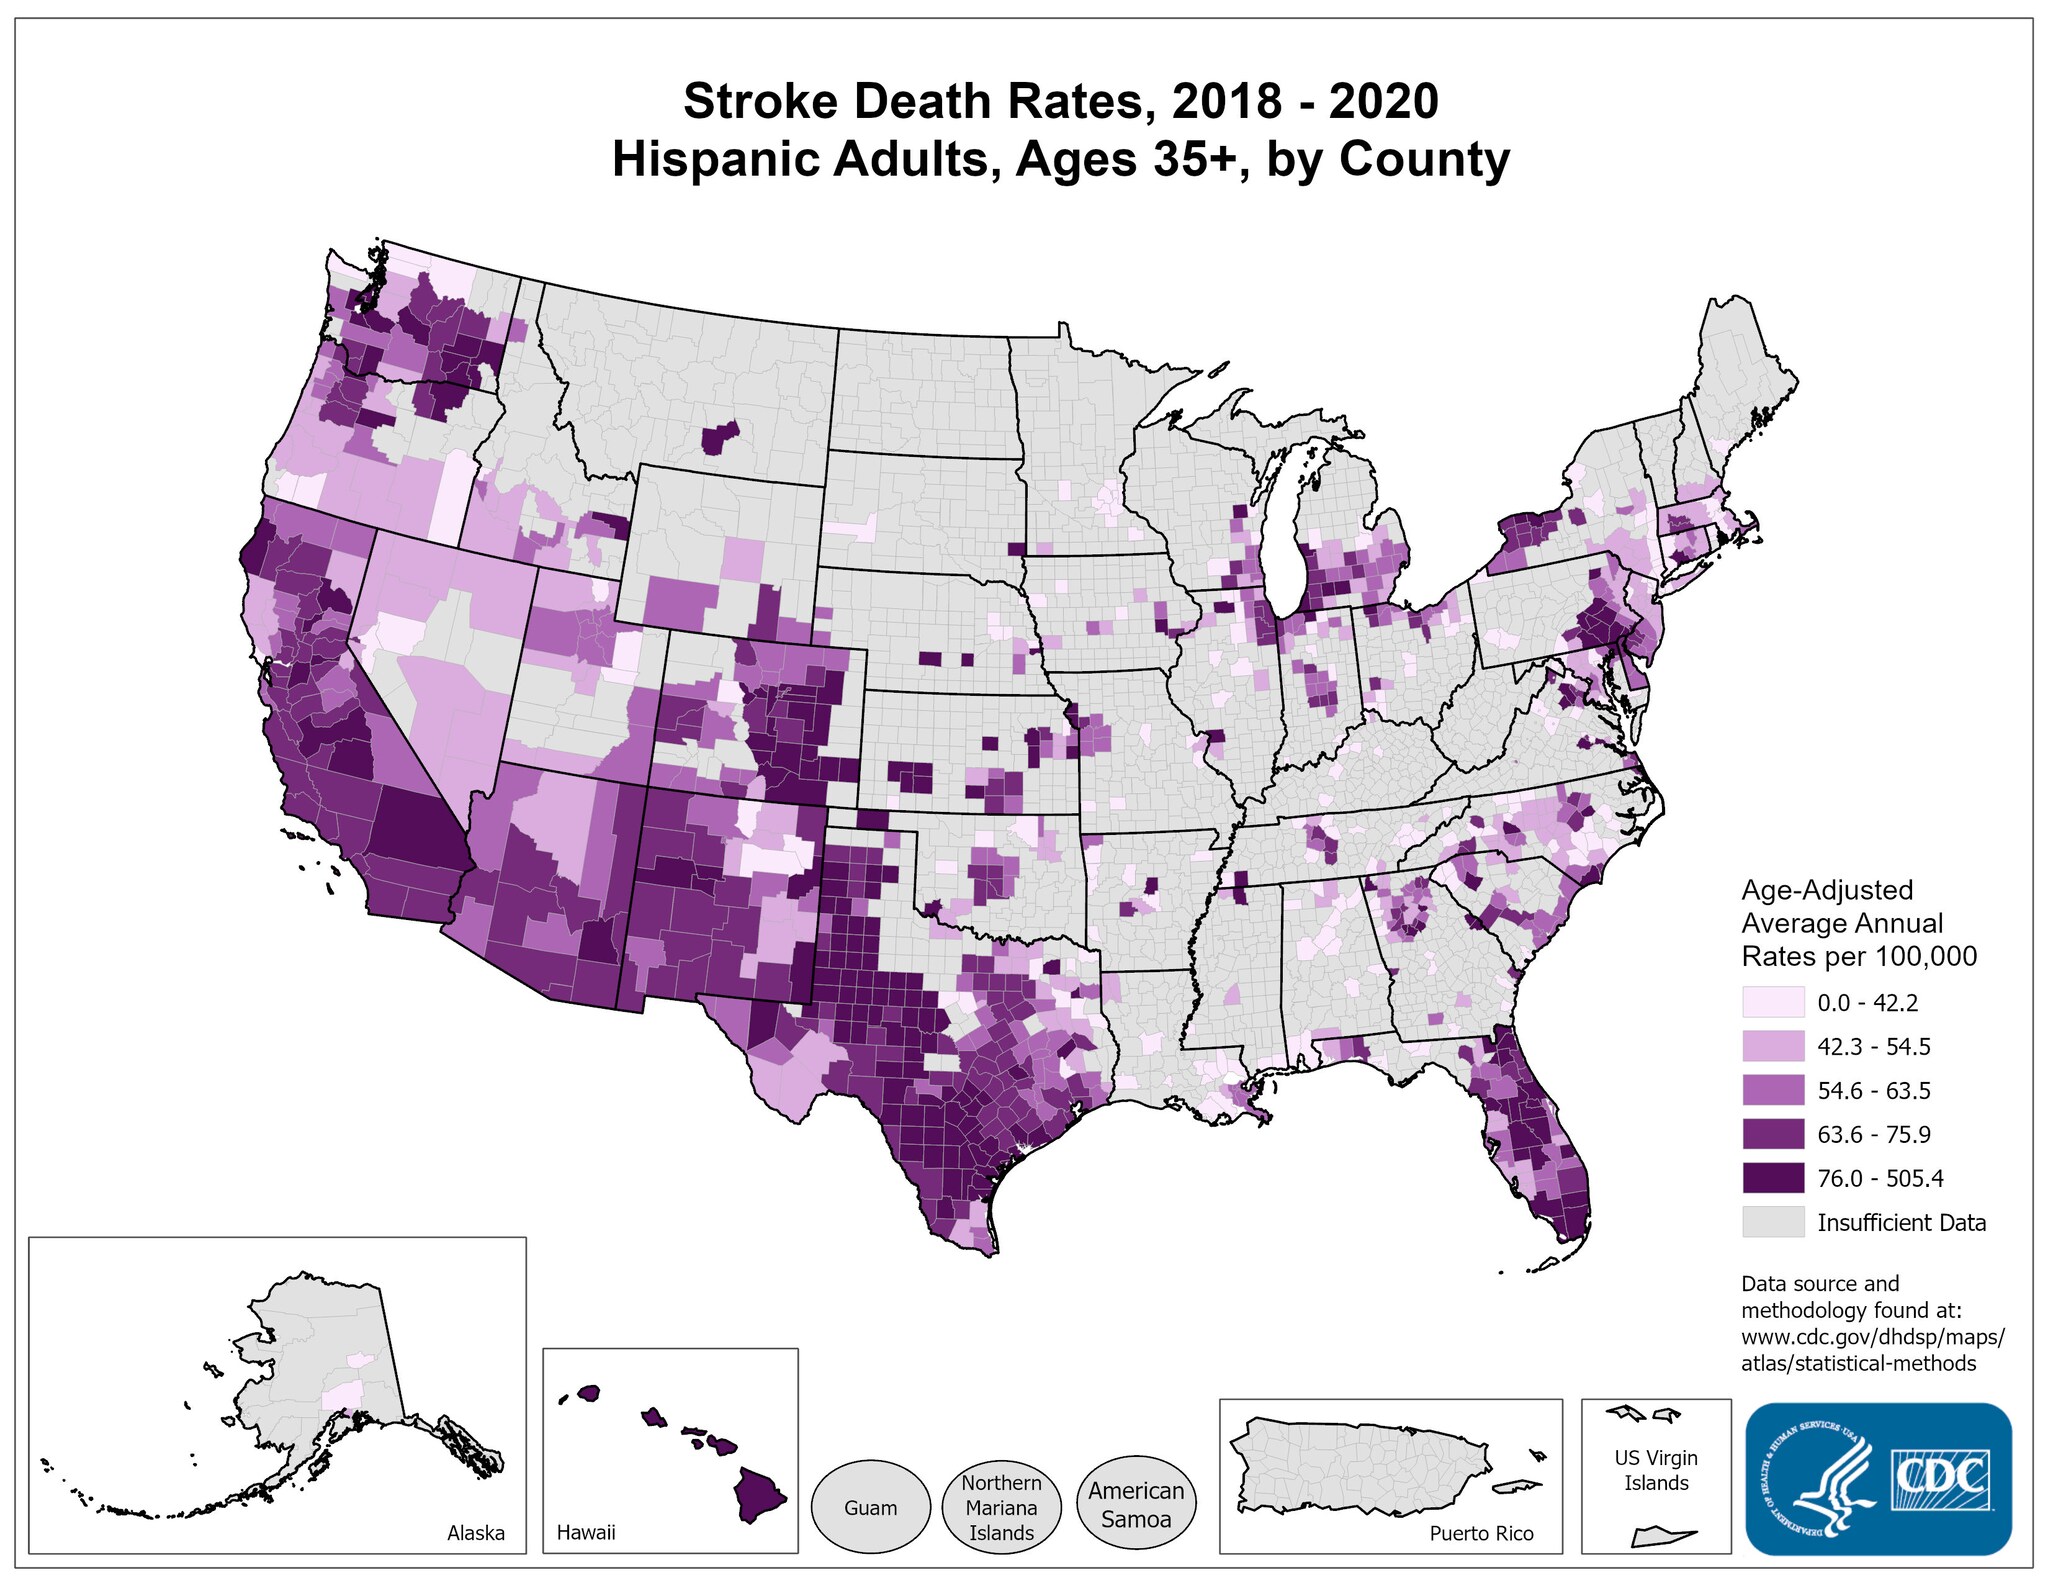 Stroke Death Rates for 2018 through 2020 for Hispanics Aged 35 Years and Older by County